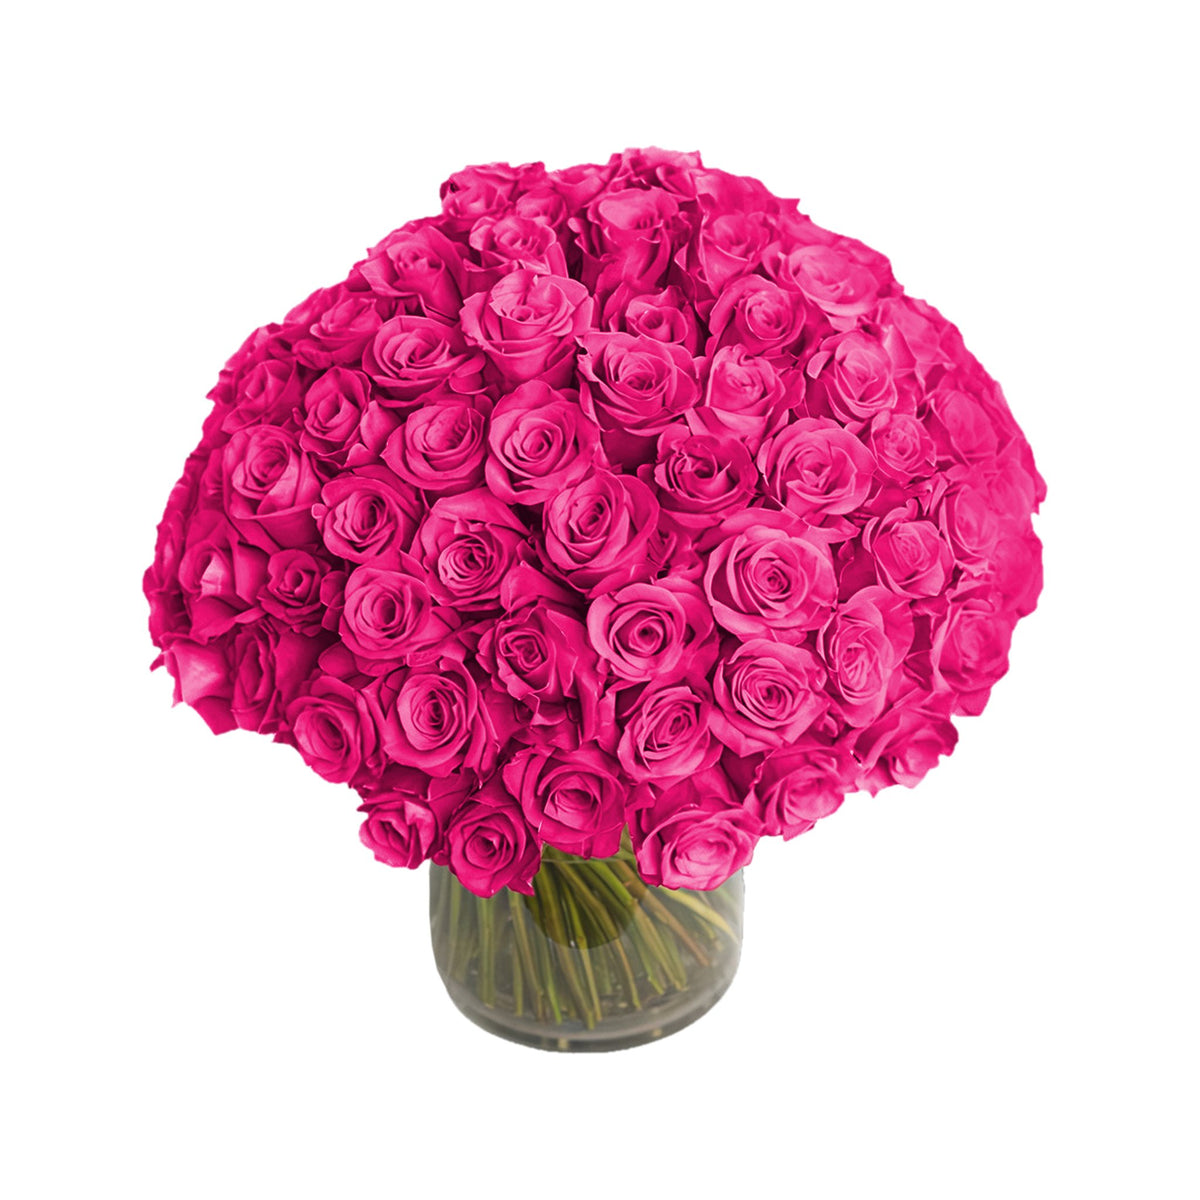 NYC Flower Delivery - Fresh Roses in a Crystal Vase | Hot Pink - 100 Roses - Roses